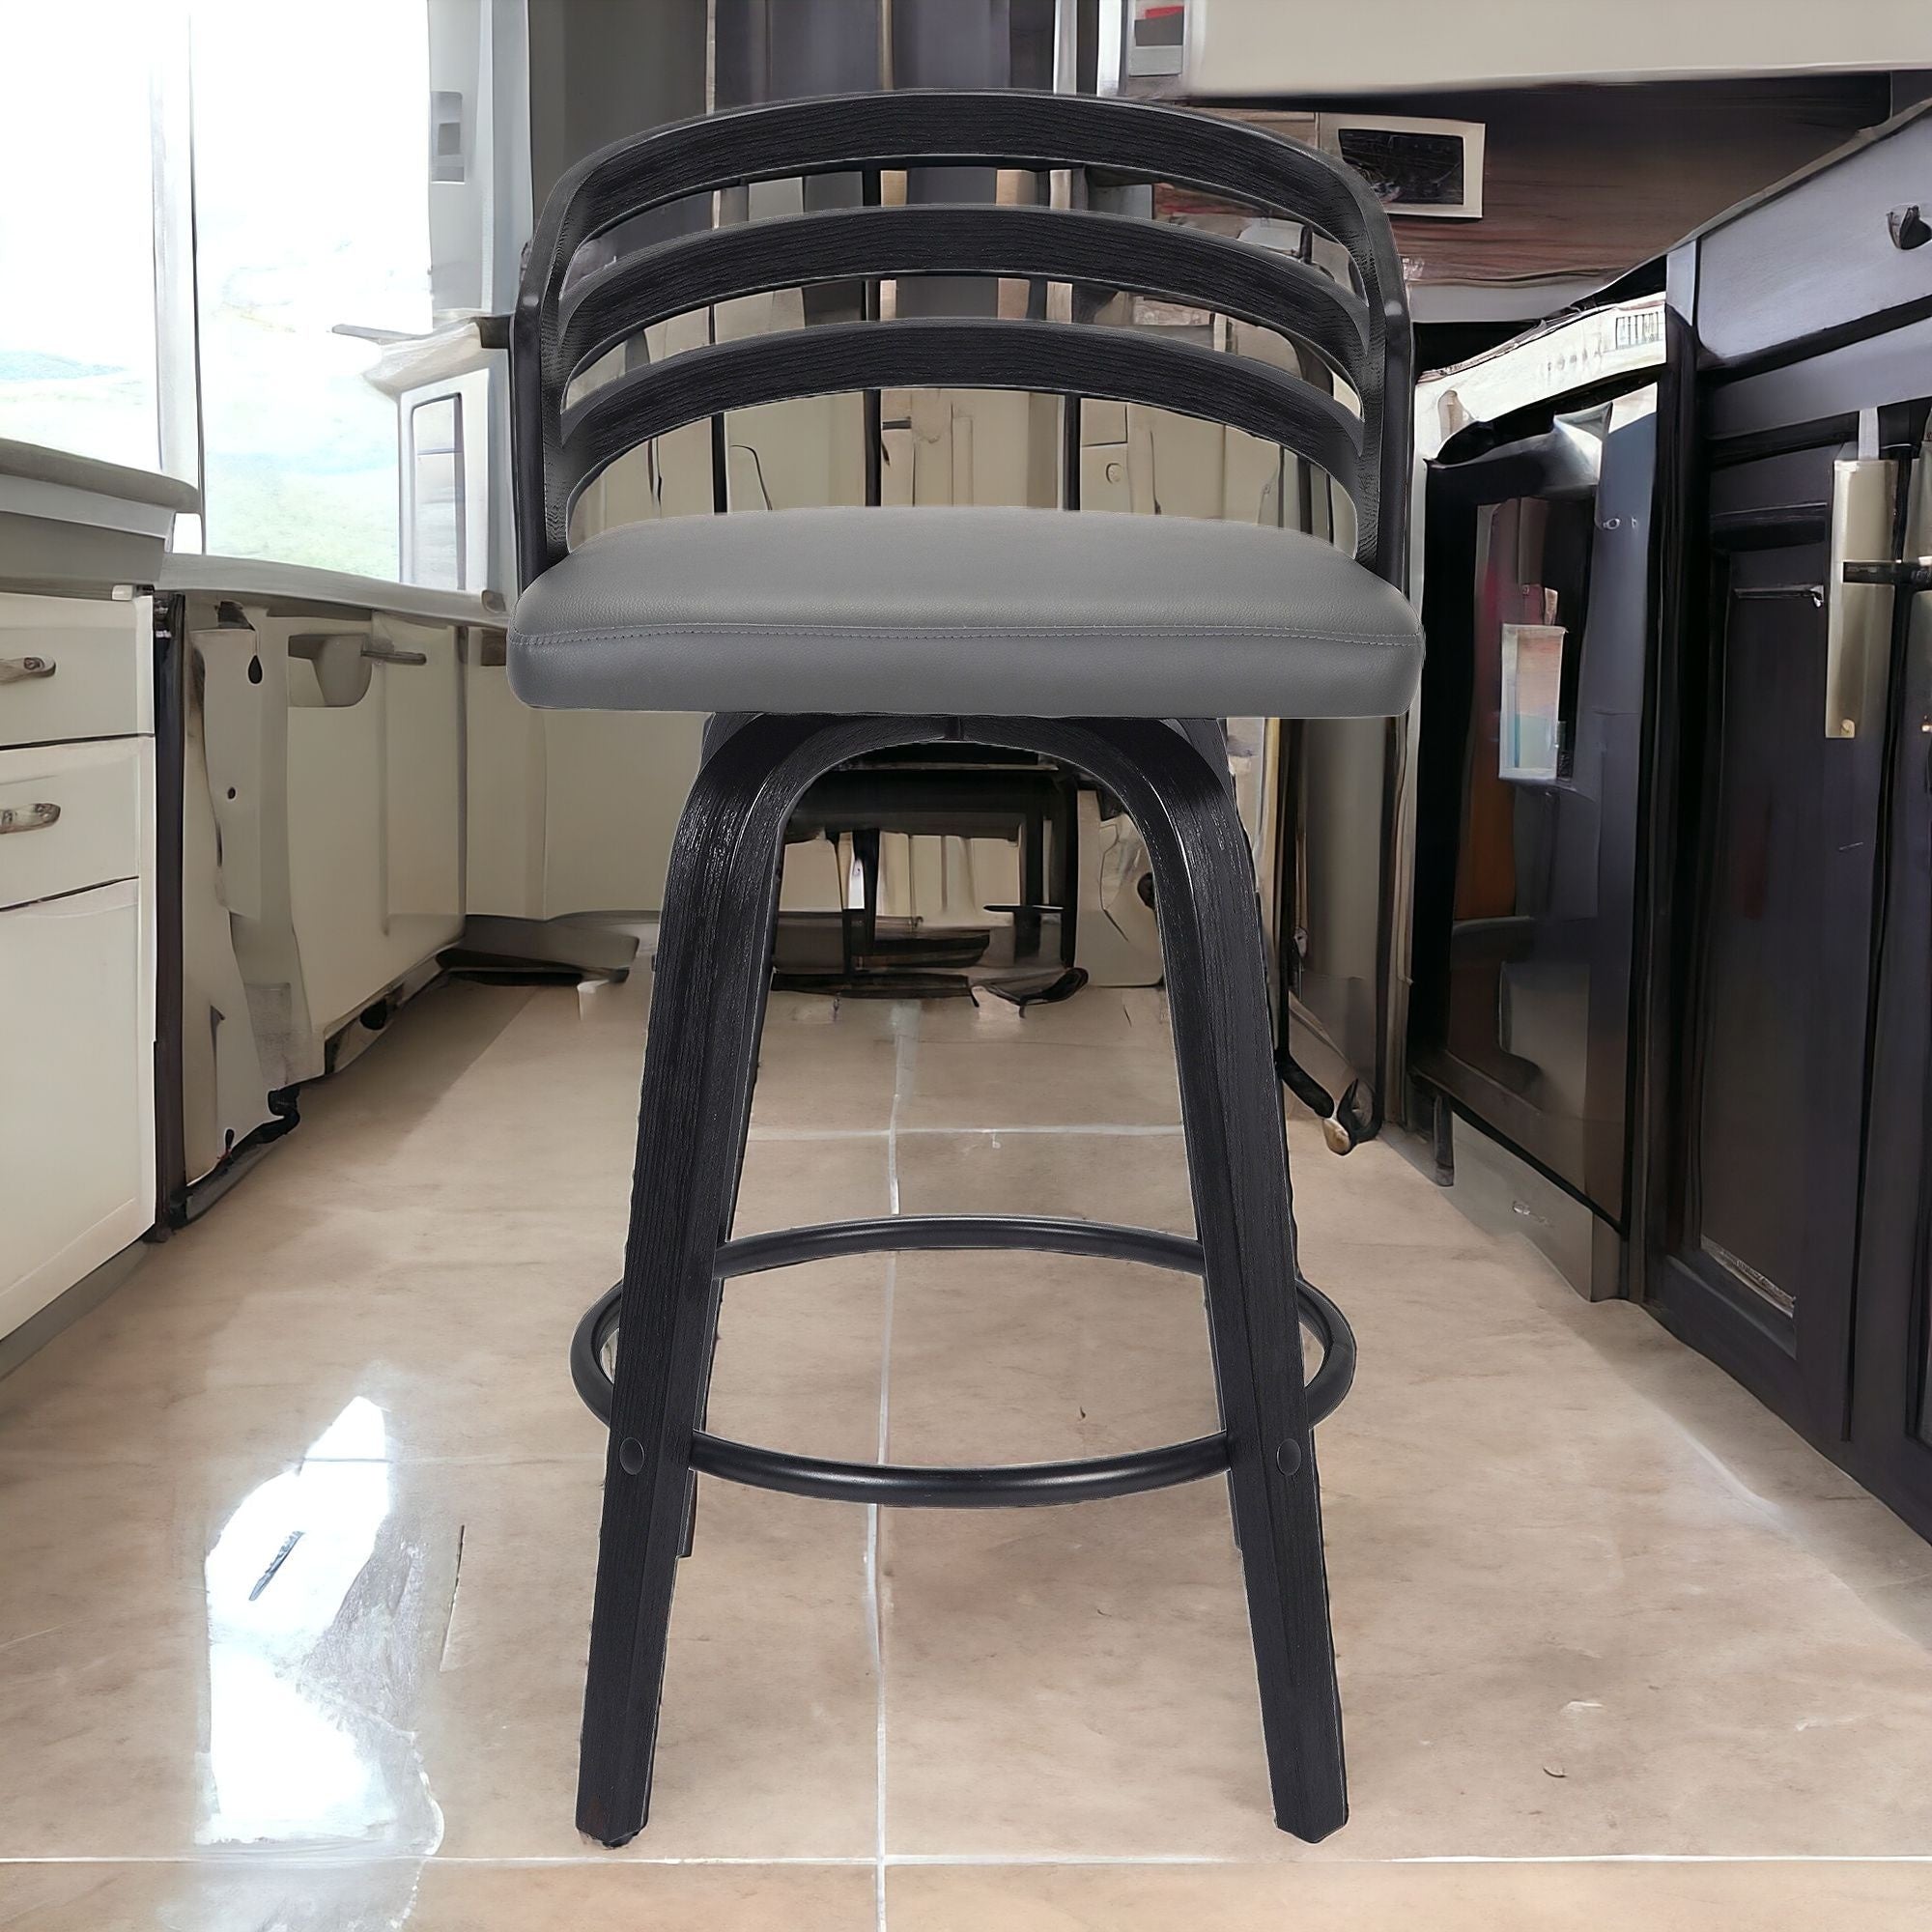 30" Gray And Black Iron Swivel Low Back Bar Height Bar Chair